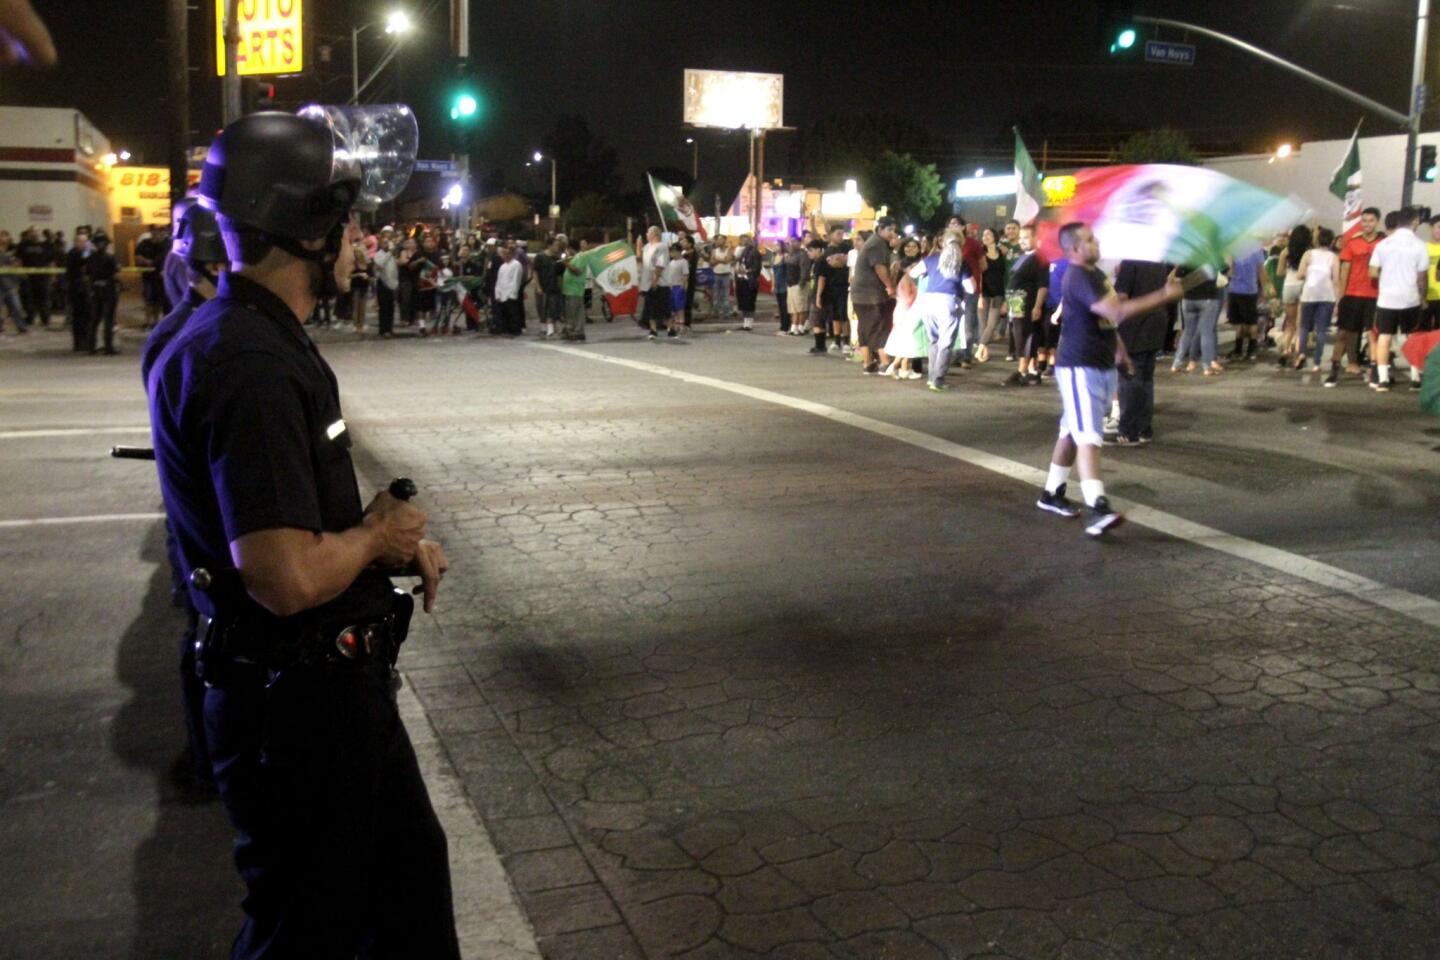 Crowds of soccer fans celebrating Mexico's World Cup win spilled onto the streets in the Pacoima area, forcing authorities to shut down off-ramps and on-ramps on the 5 Freeway.